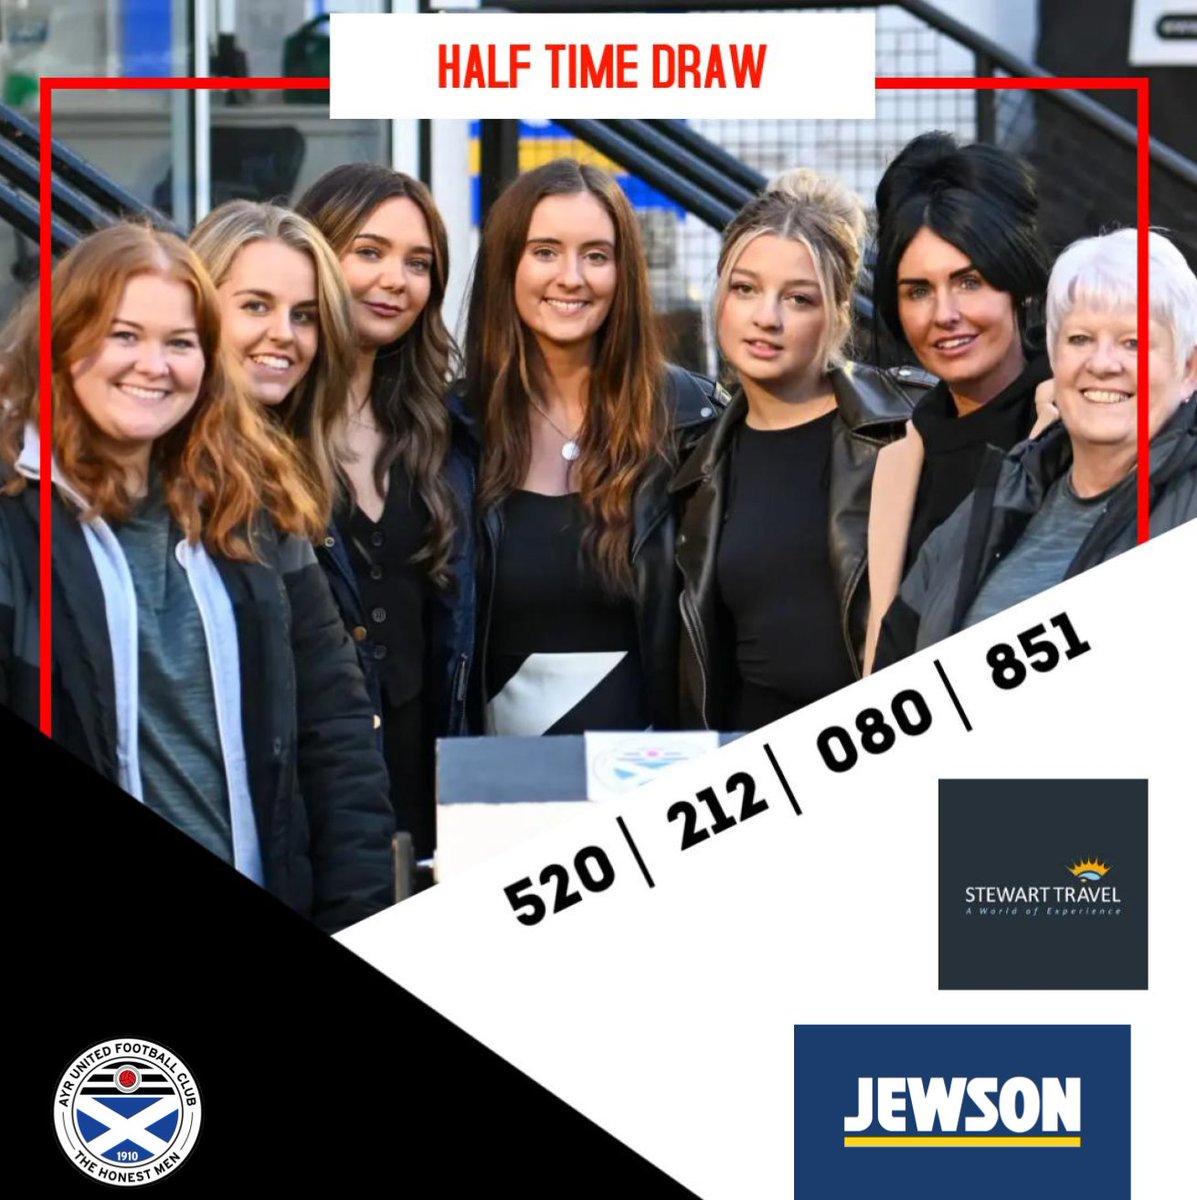 A big thank you to @StewartTravCntr for sponsoring last night's Half Time Draw. The lucky numbers were 520, 212, 080 and 851... Congratulations to all the winners 👏 #WeAreUnited